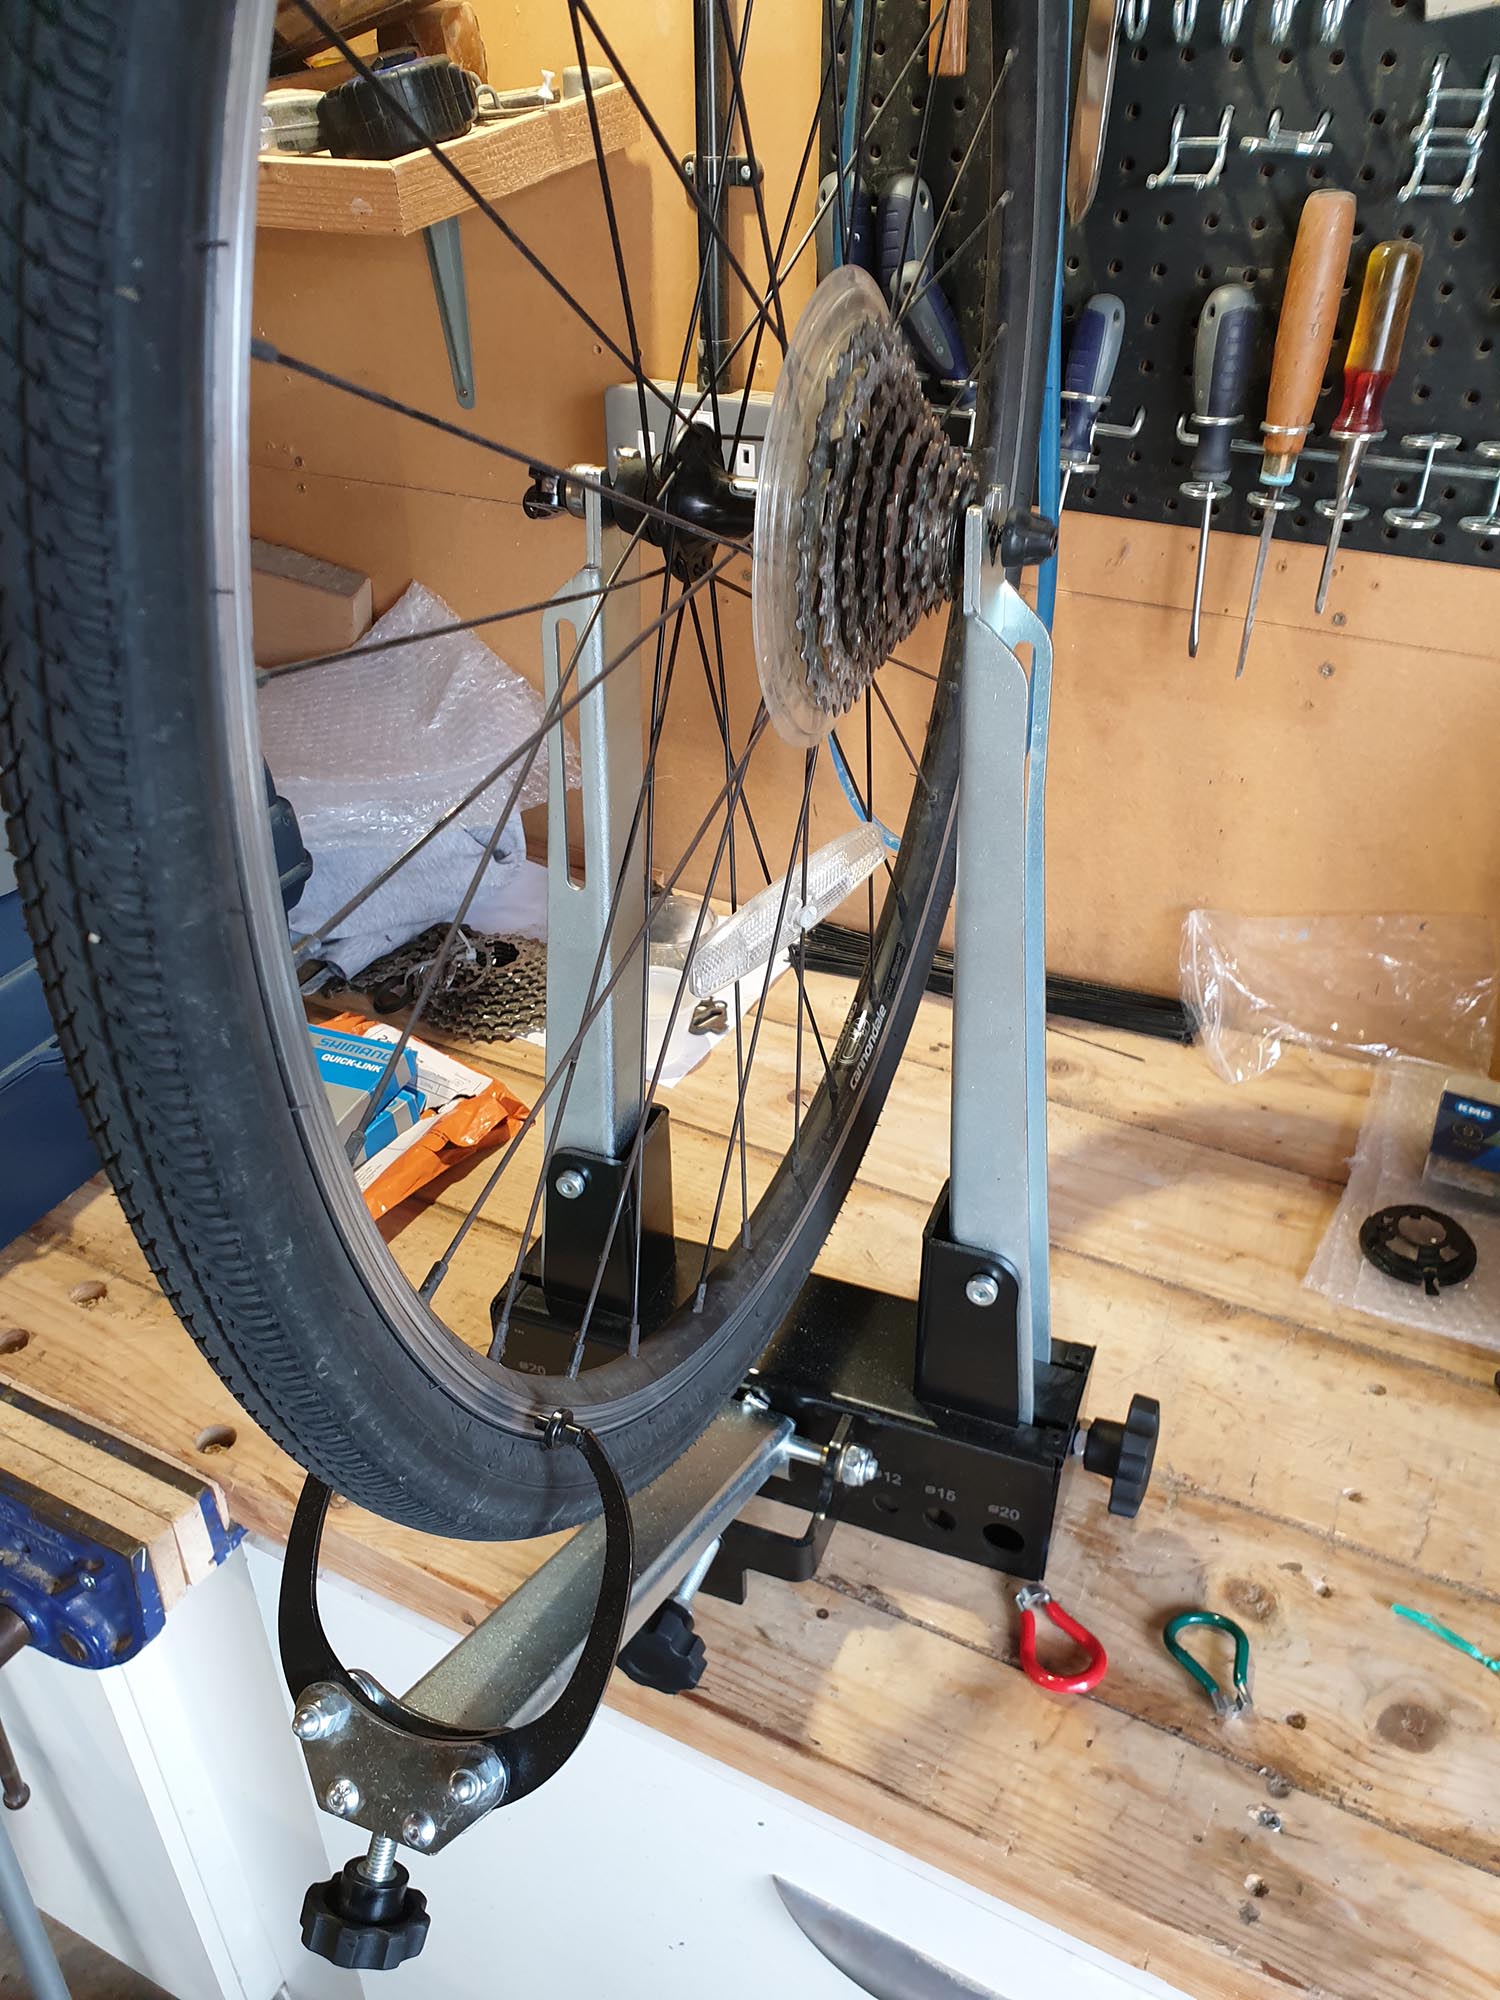 Rear wheel out of true. Placed in a truing jig and re-trued. Ipswich.